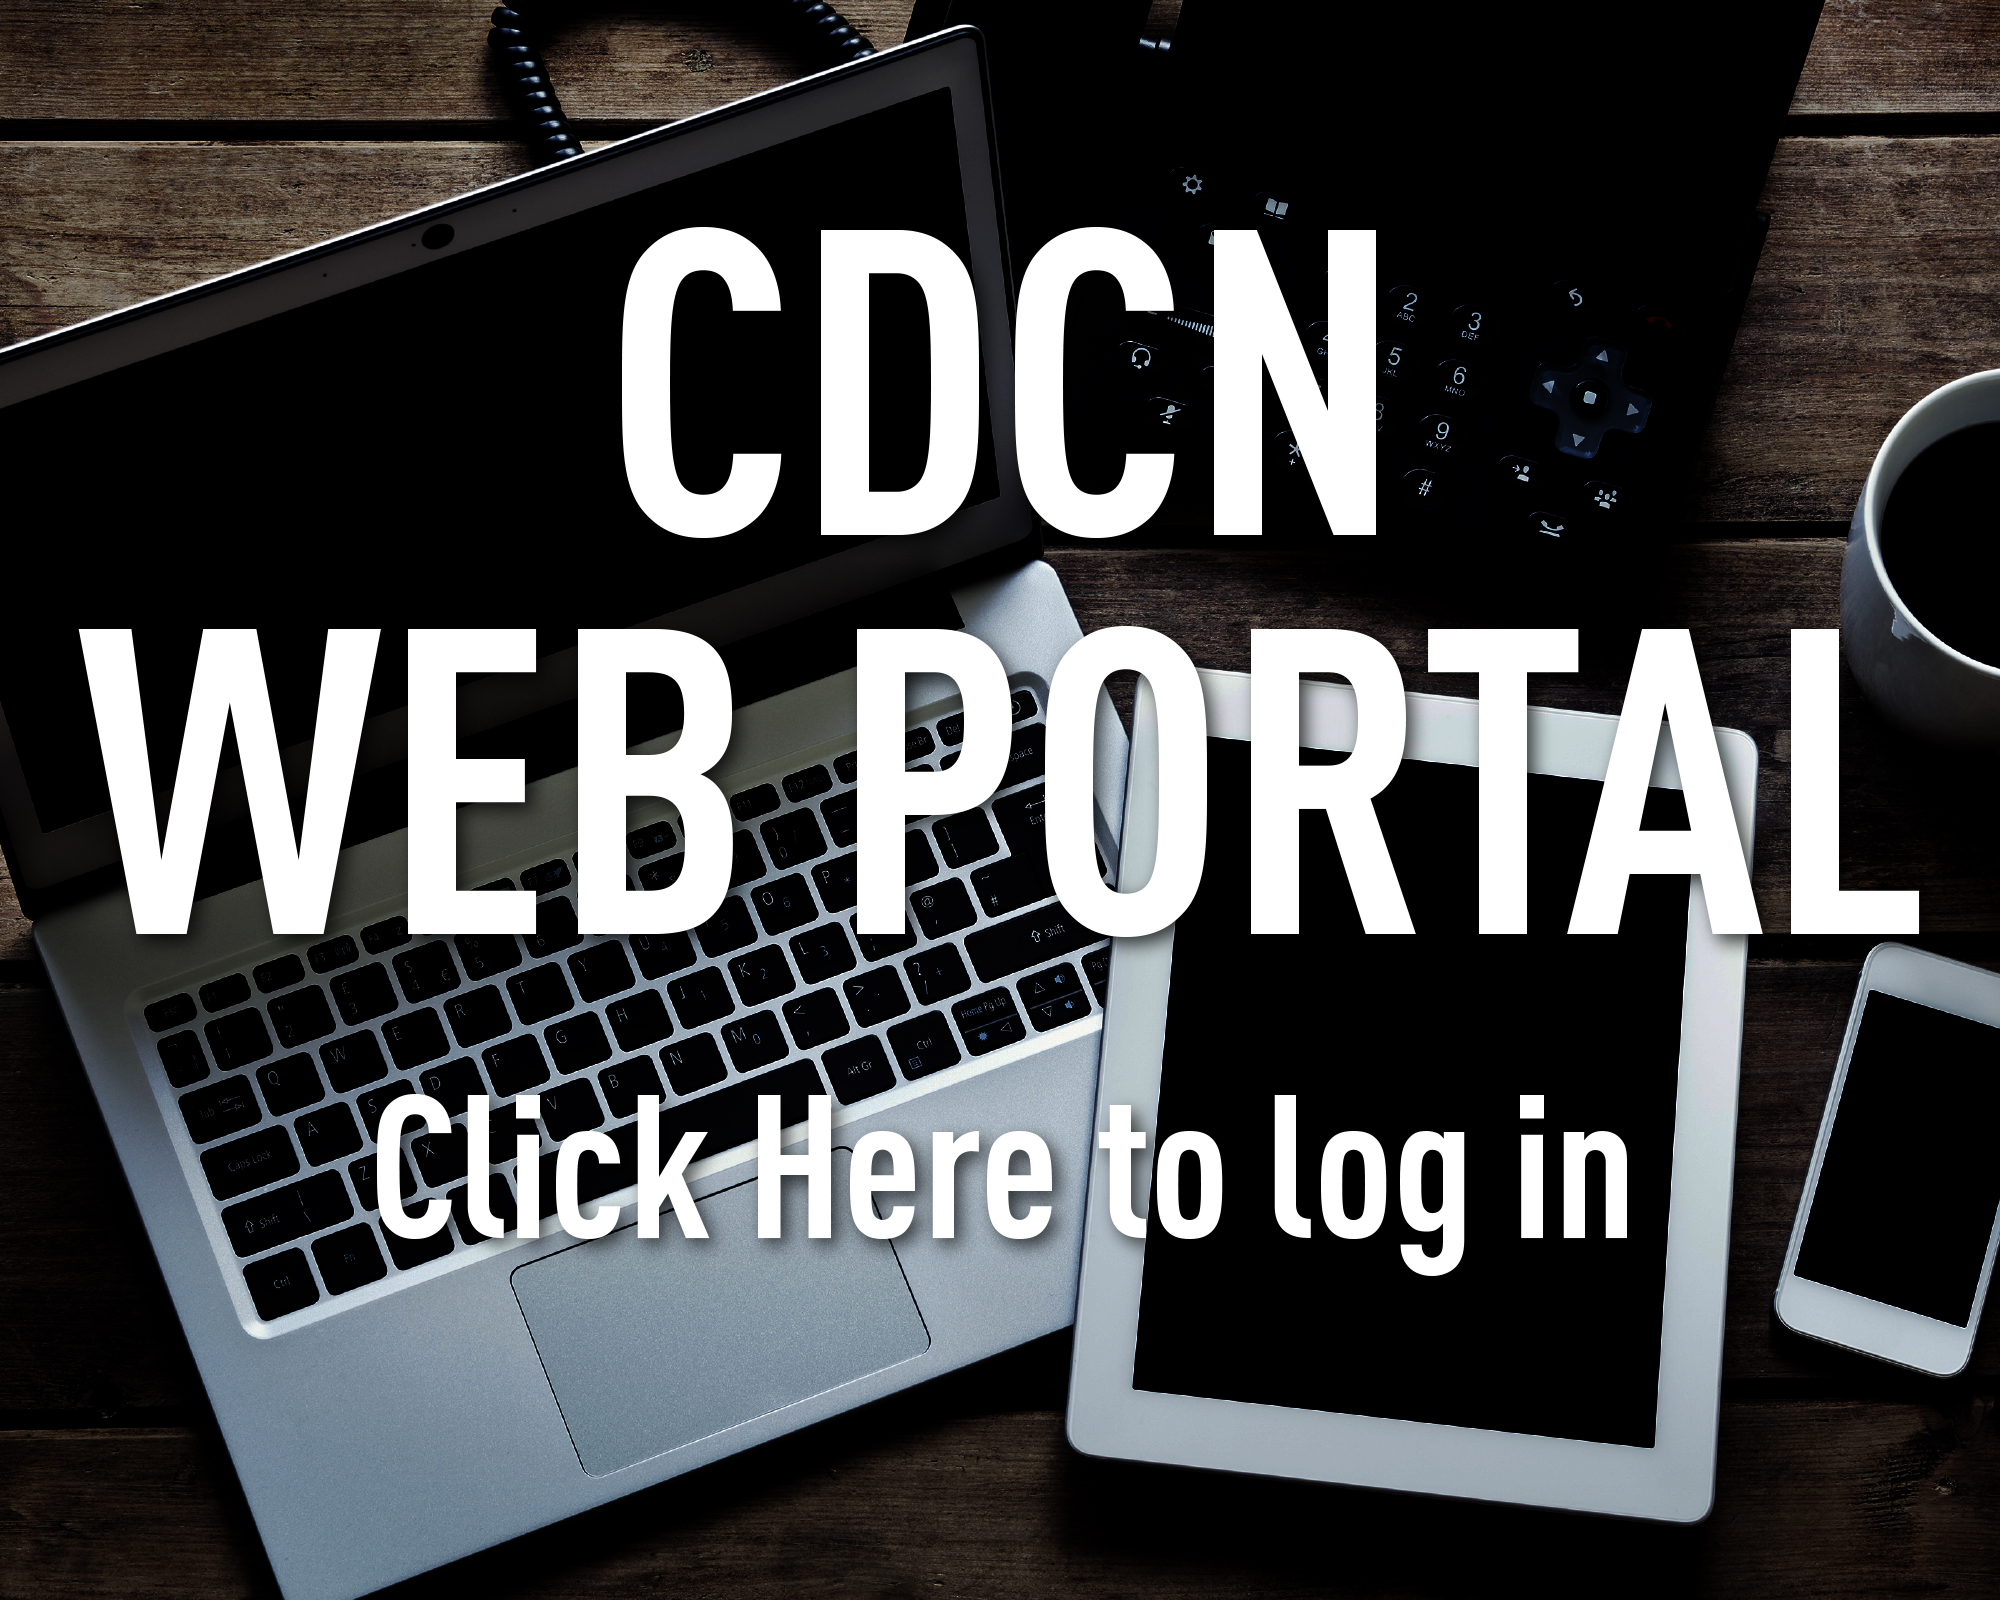 CDCN Web Portal. Click Here to log in.